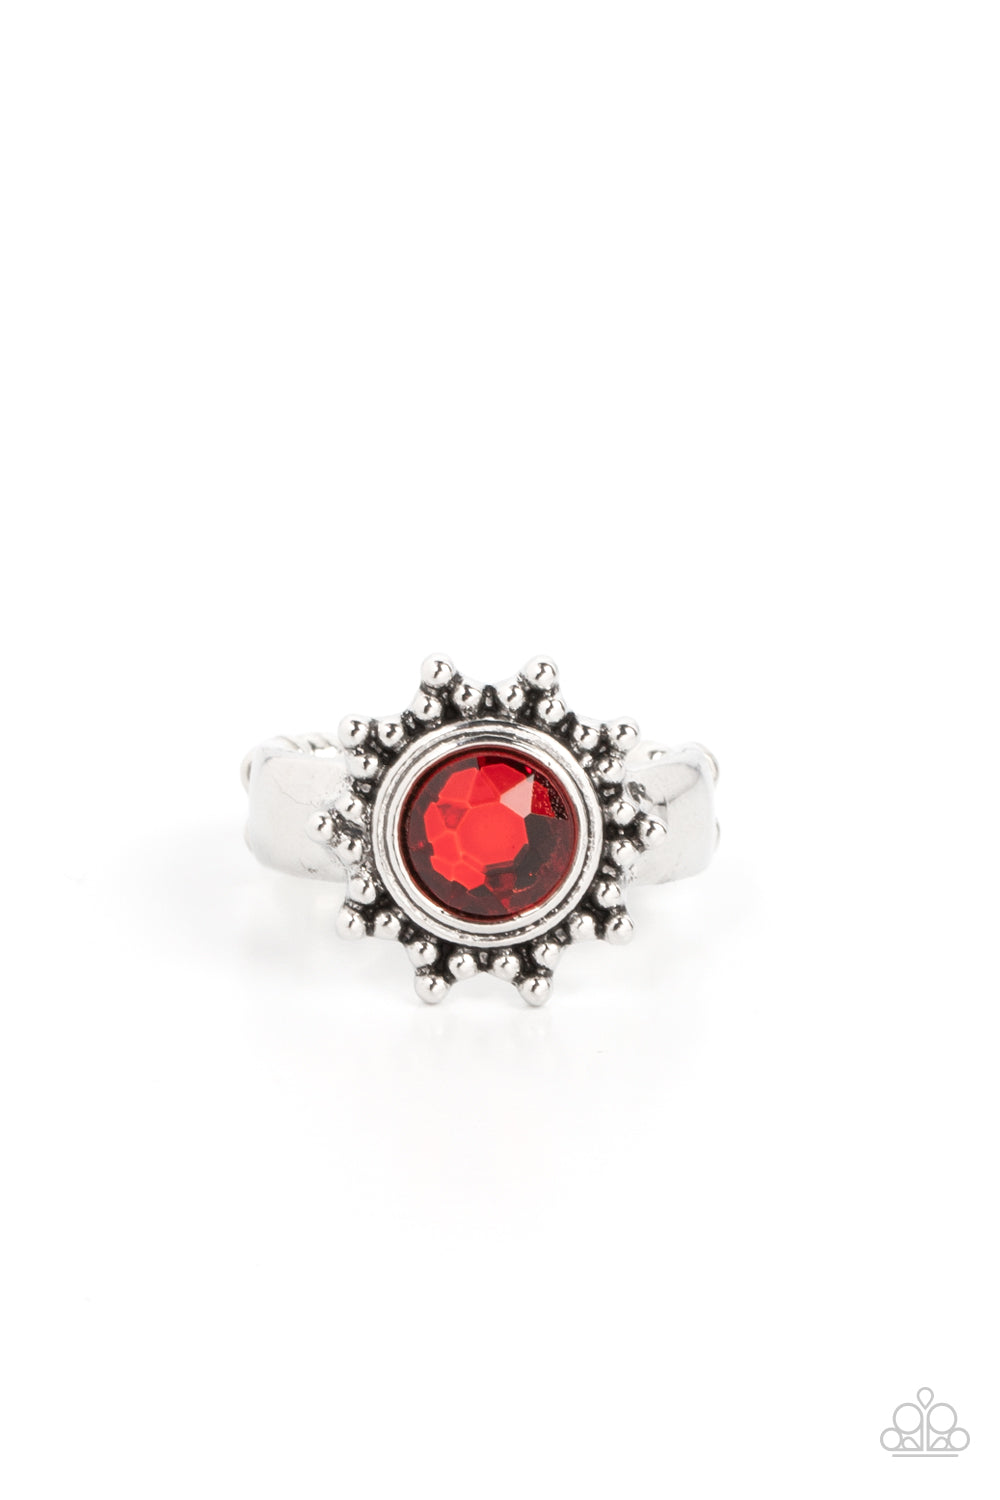 five-dollar-jewelry-expect-sunshine-and-reign-red-paparazzi-accessories